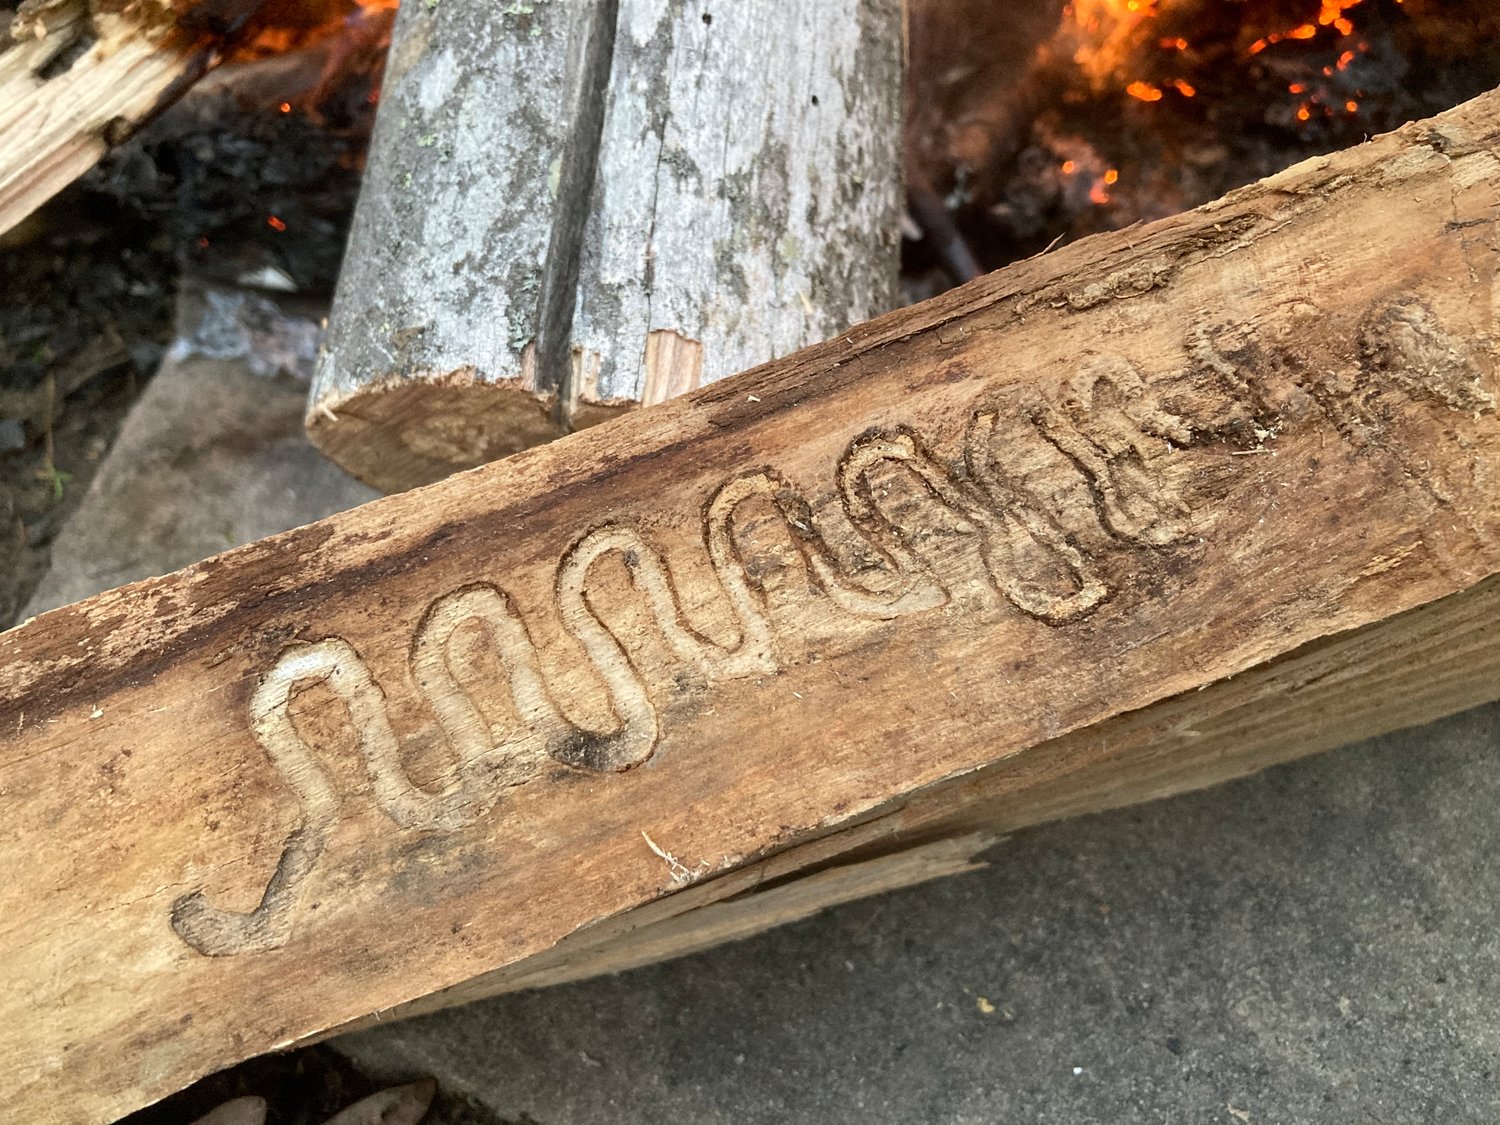 Can you discern a message in this cleverly carved insect script?